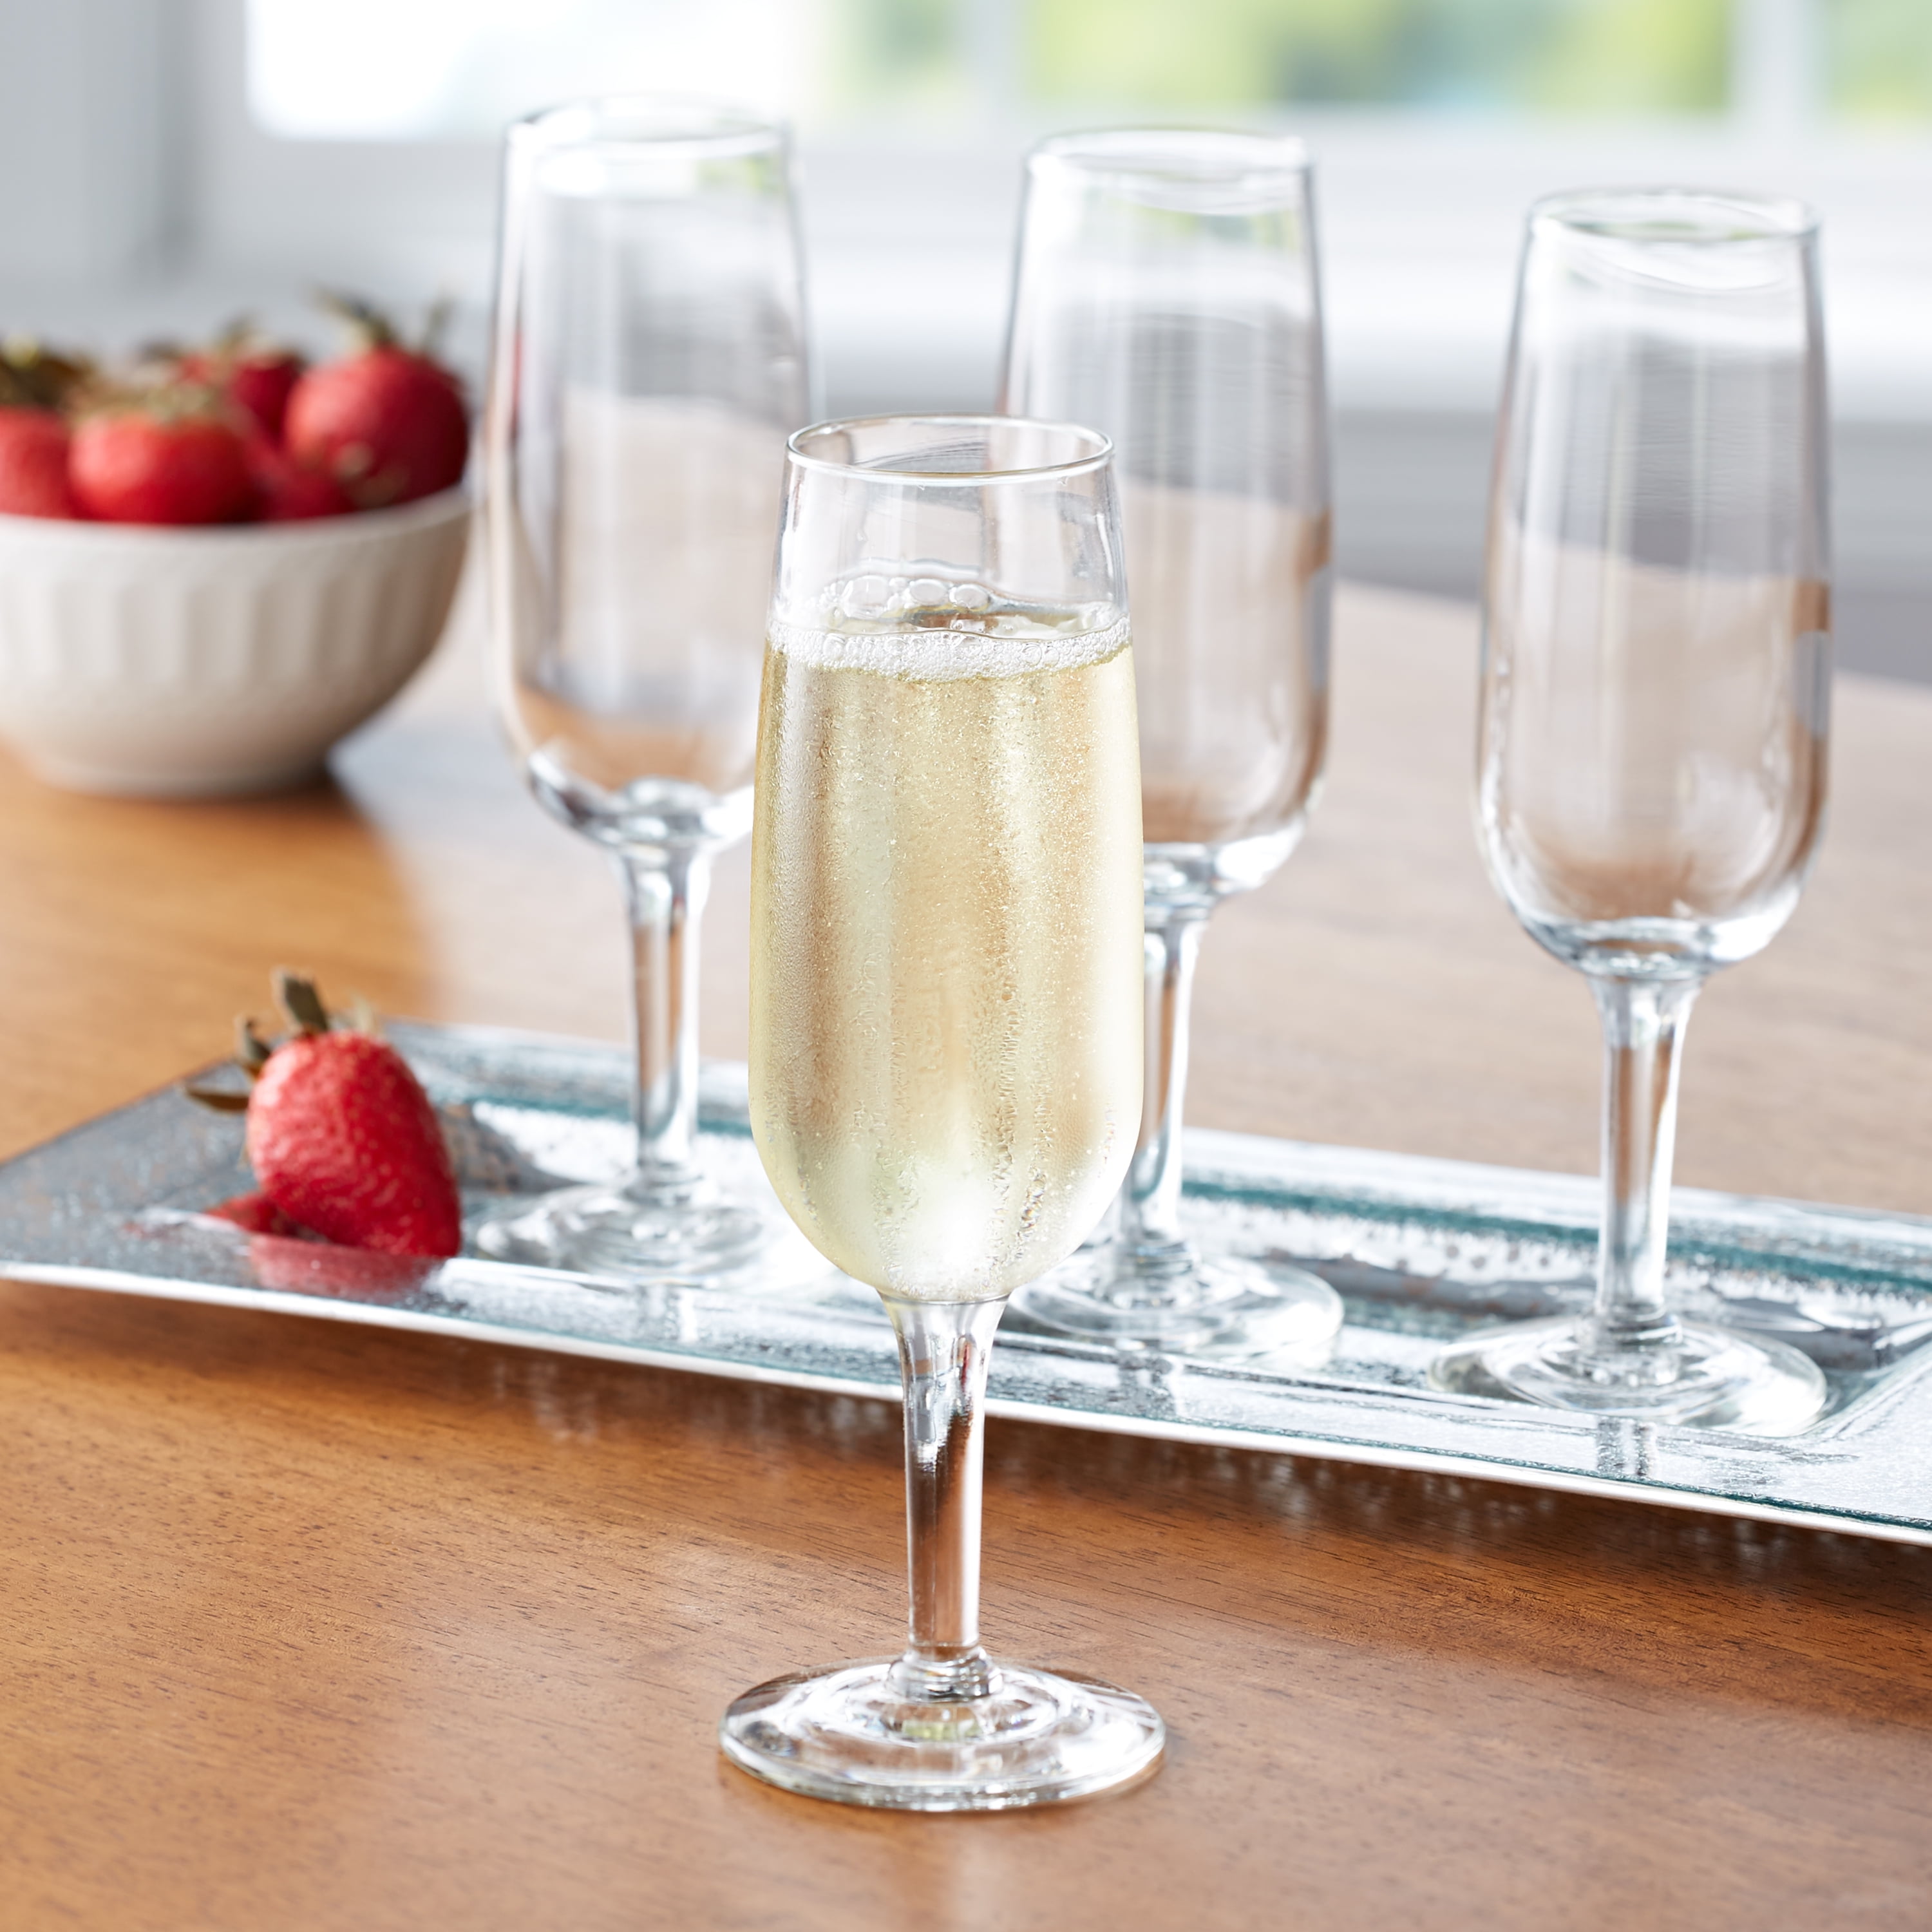 Mainstays 6.25-Ounce Champagne Flute Glasses, Set of 12